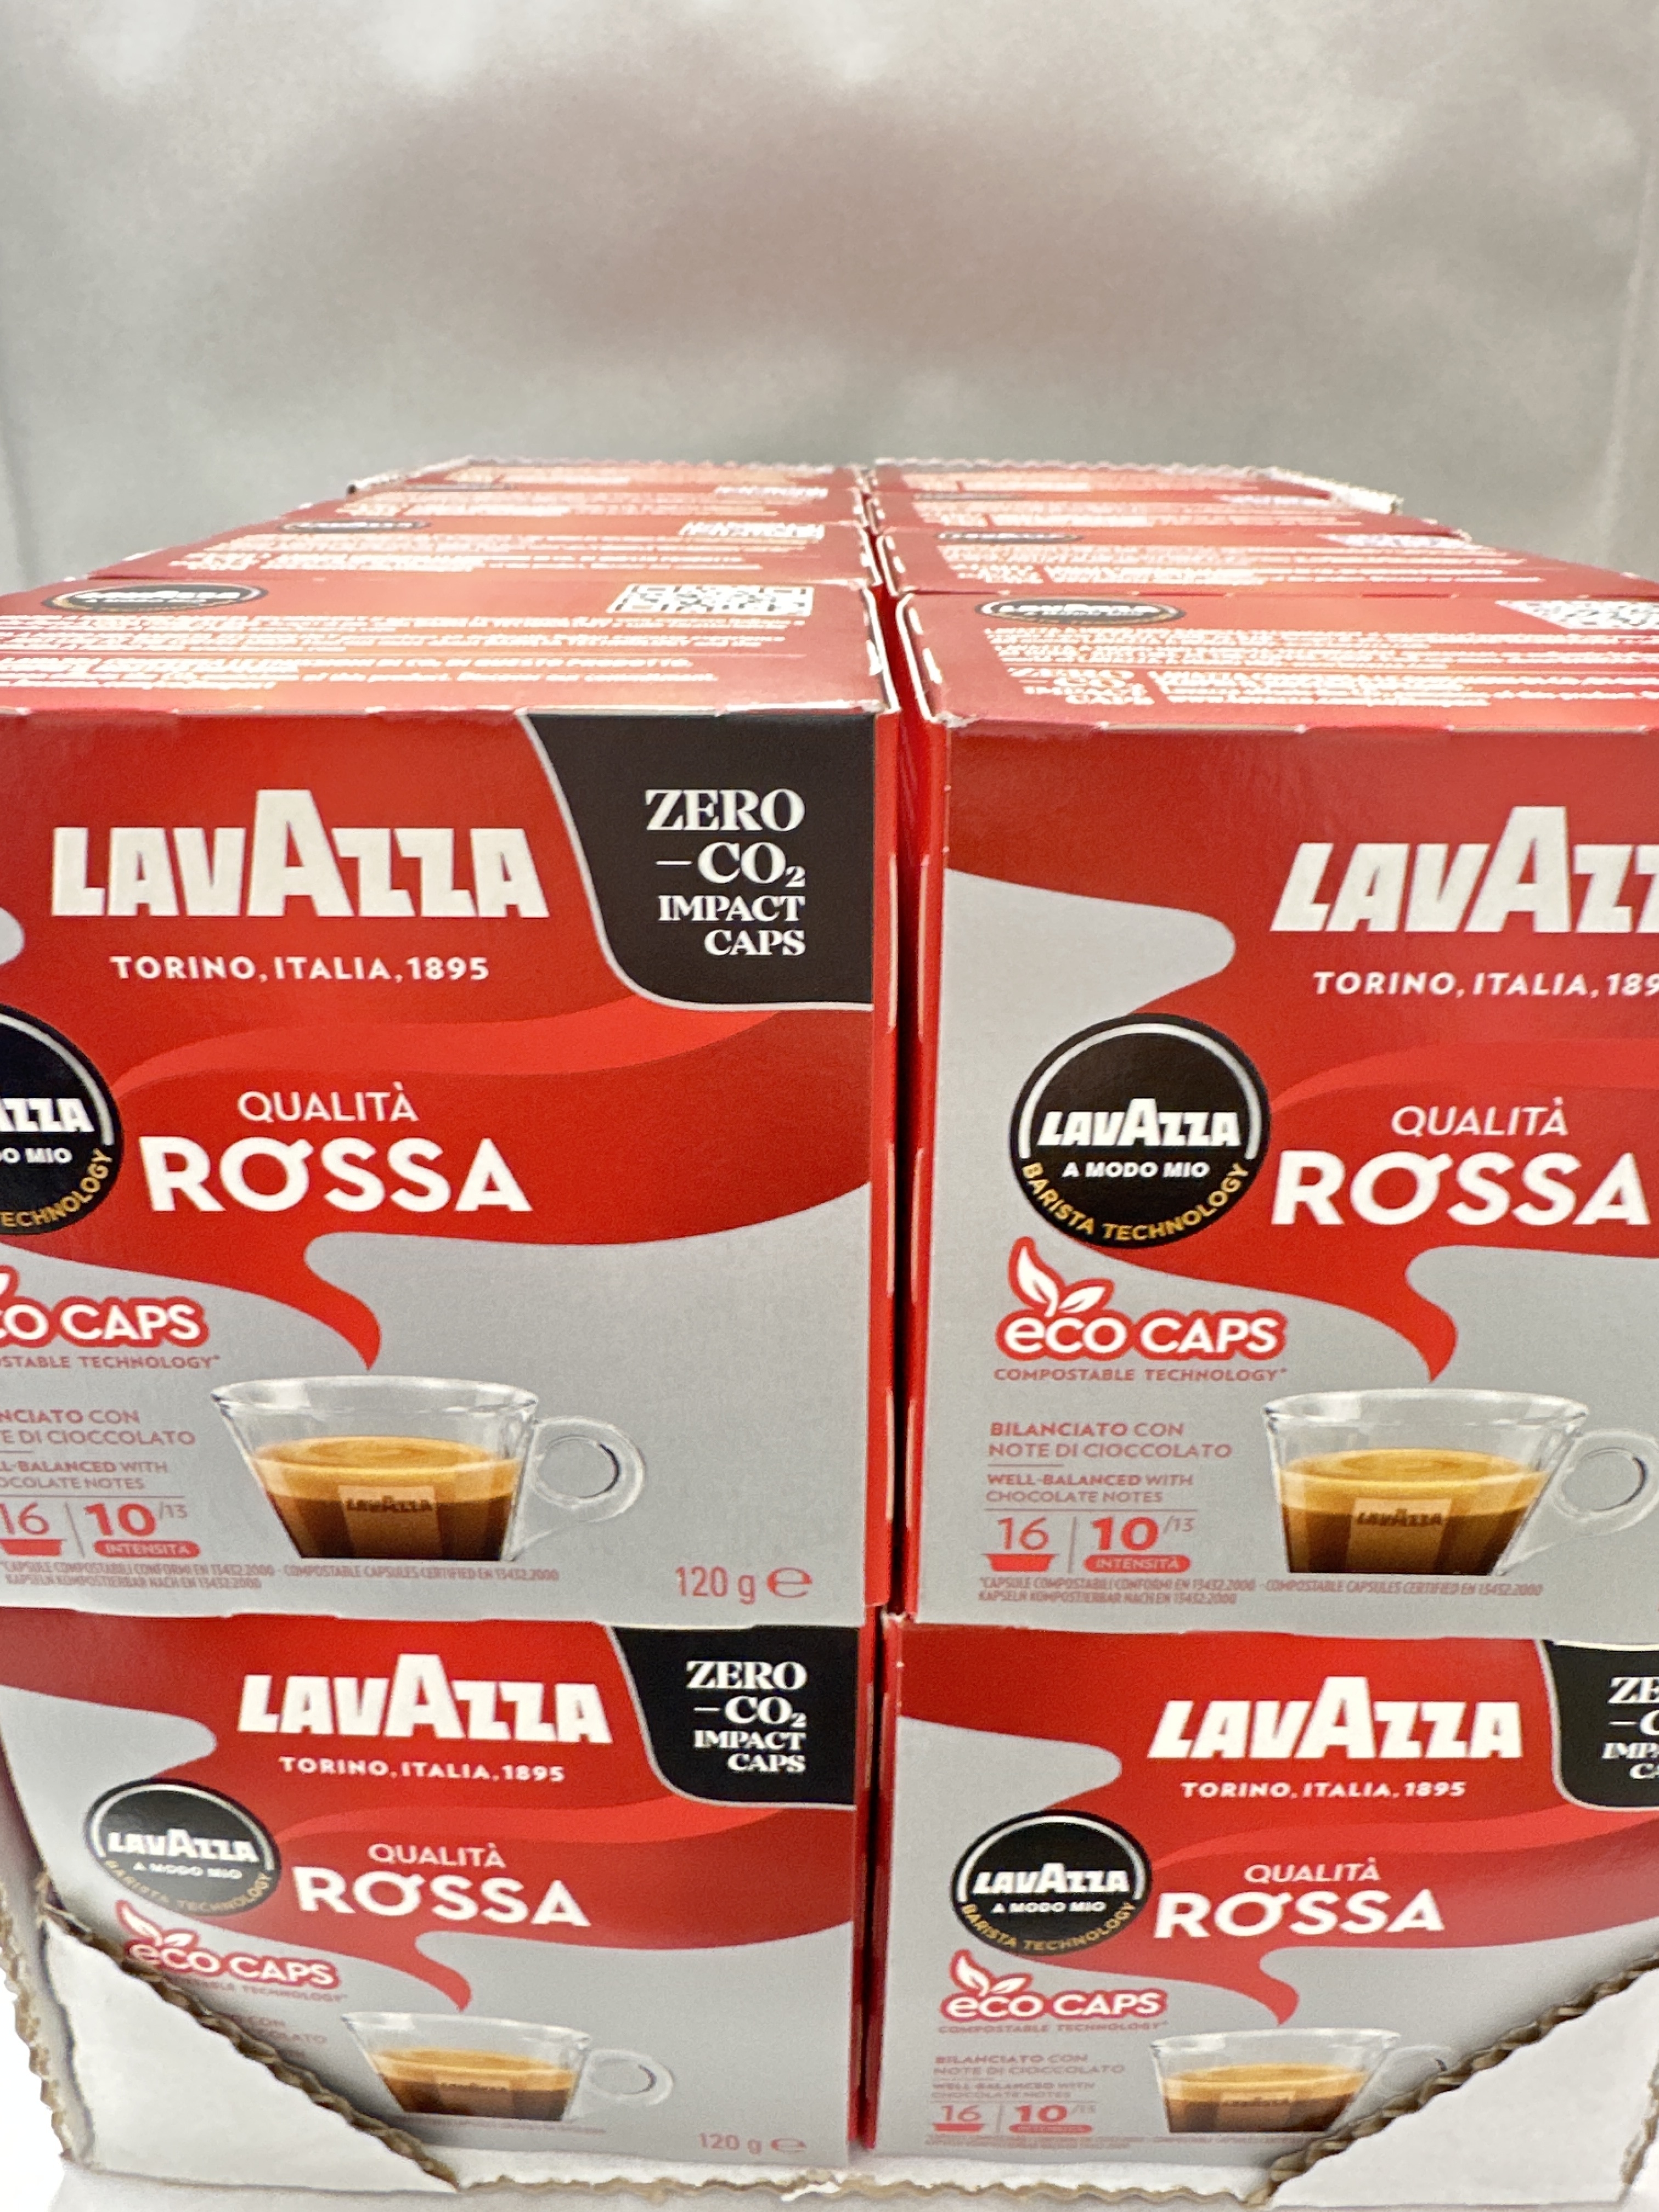 Lavazza, A Modo Mio Qualita Rossa, Coffee Capsules, Arabica and Robusta,  Full and Sustained Taste, Intensity 10/13, Medium Roasting, Compostable, 16  Packs of 16 Coffee Pods (256 Capsules) BEST BEFORE DATE 30/09/2023